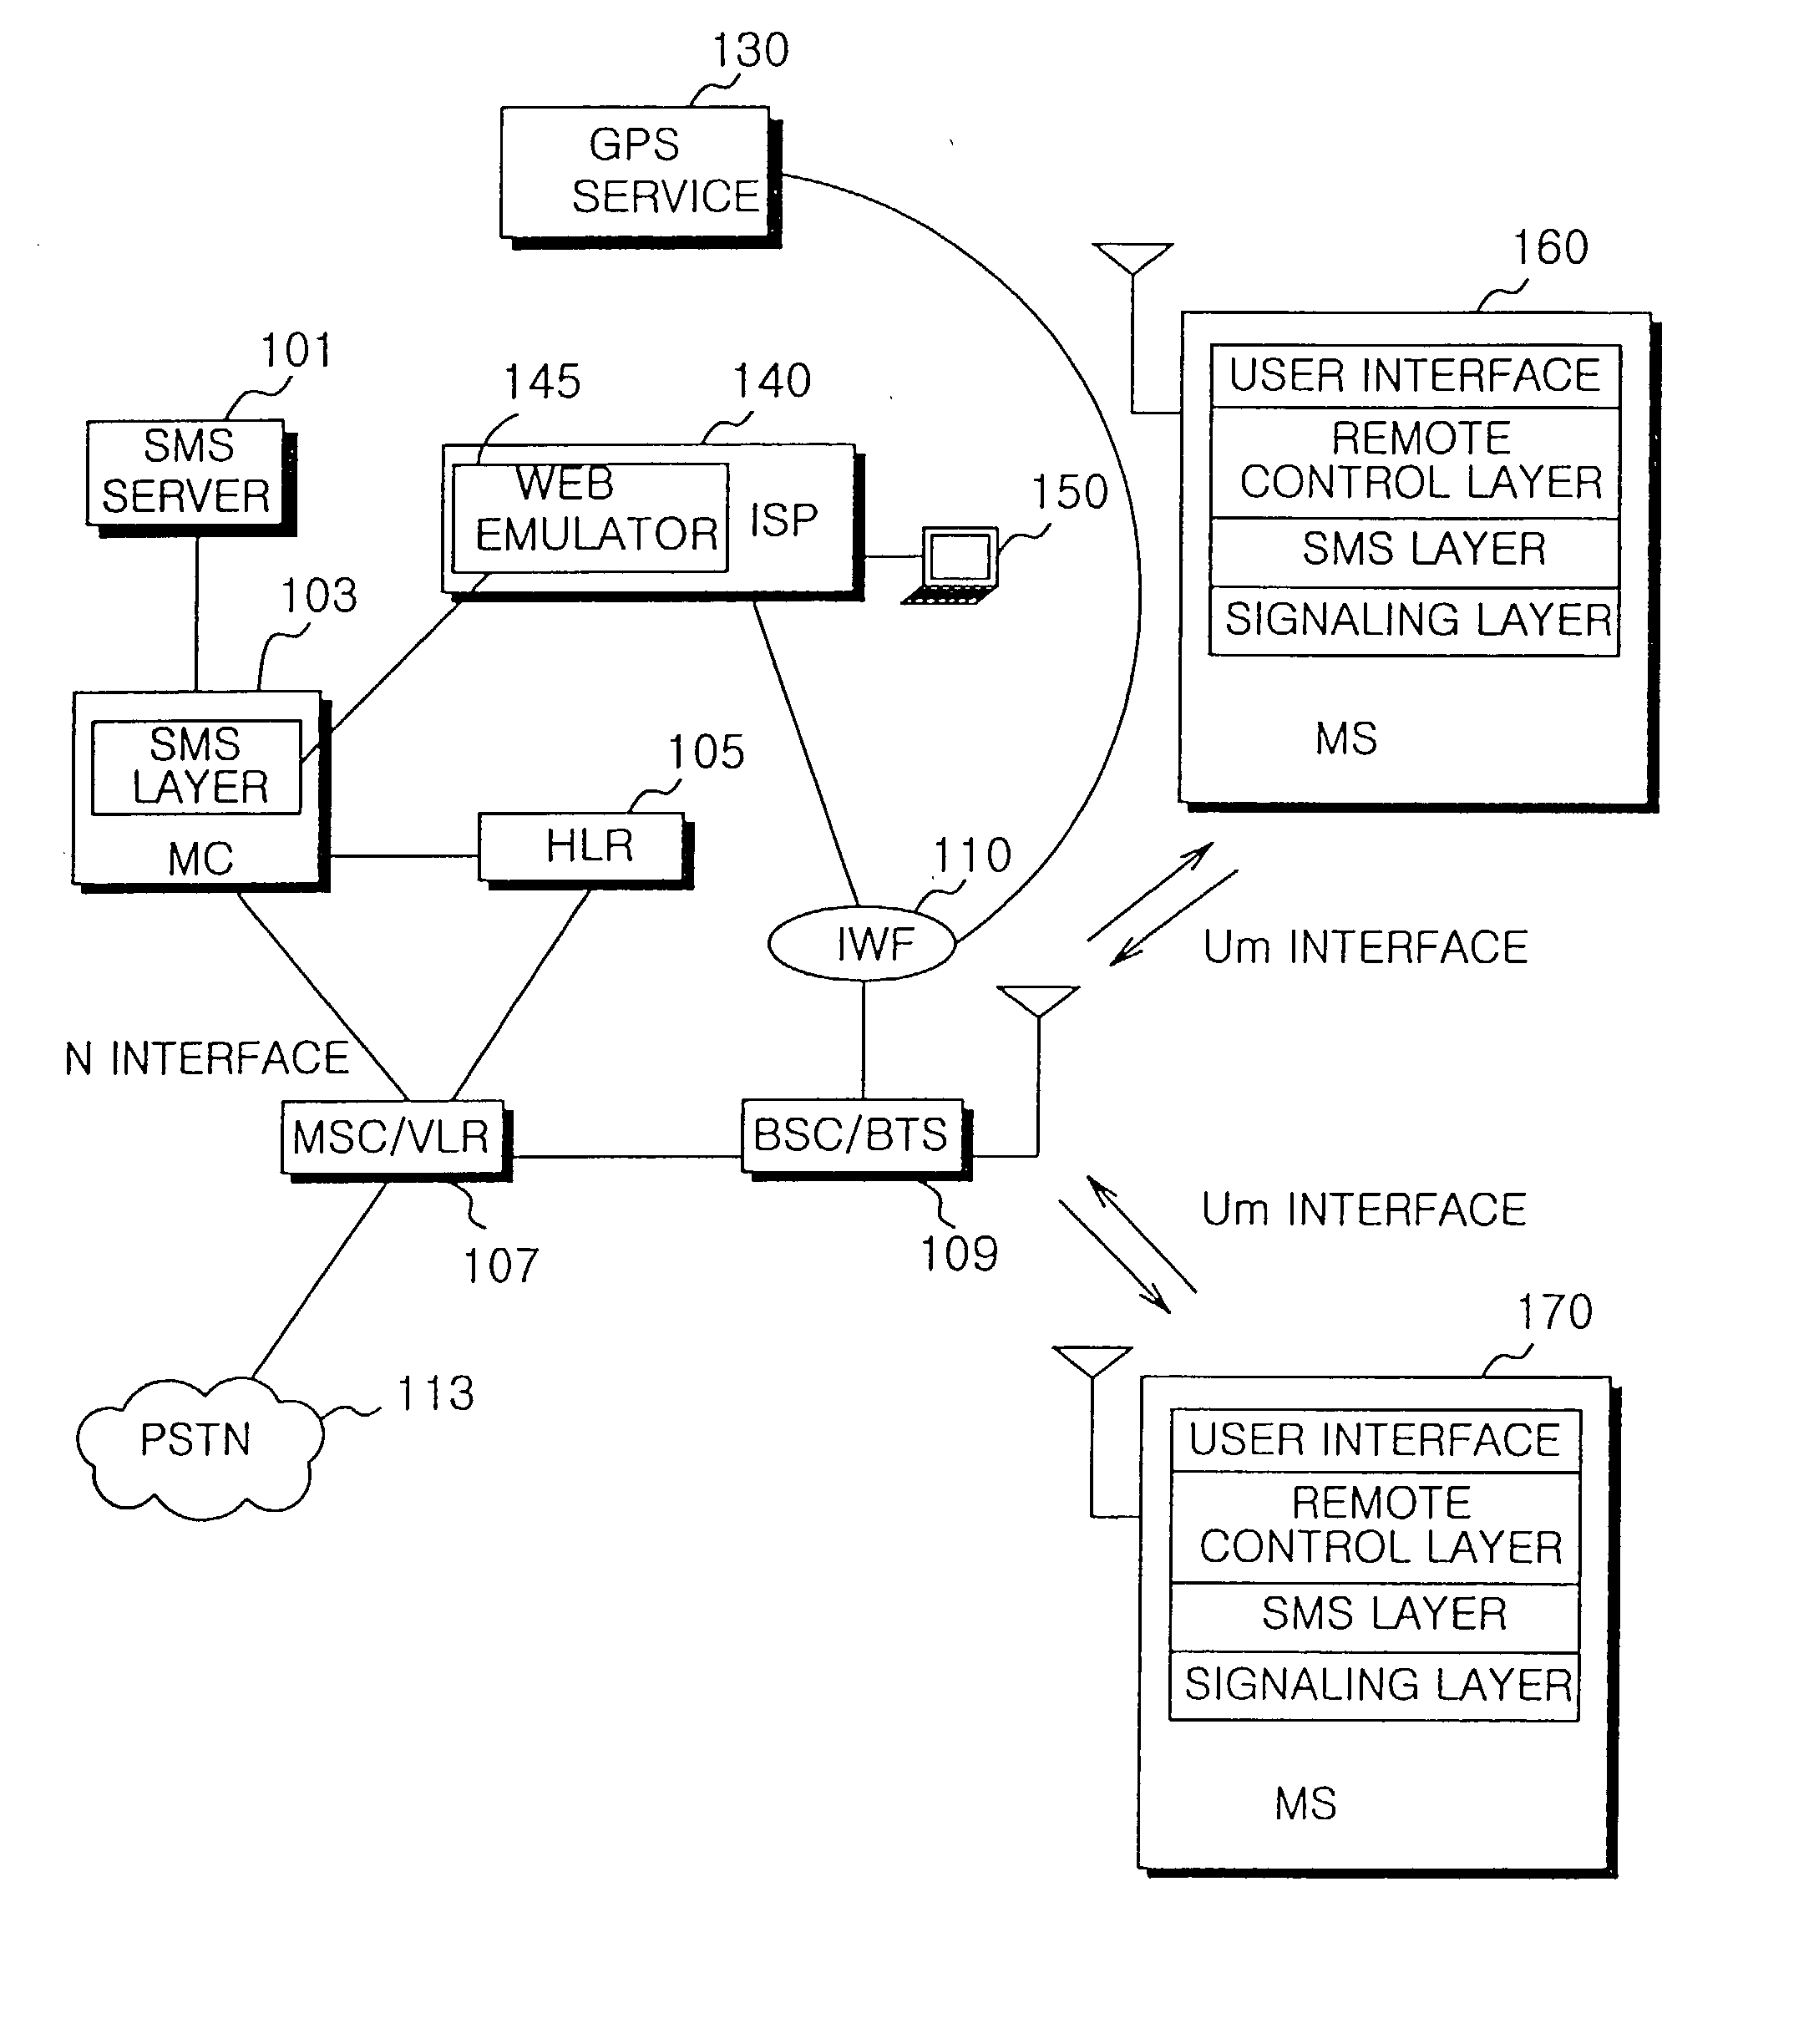 System and method for remotely controlling a mobile terminal